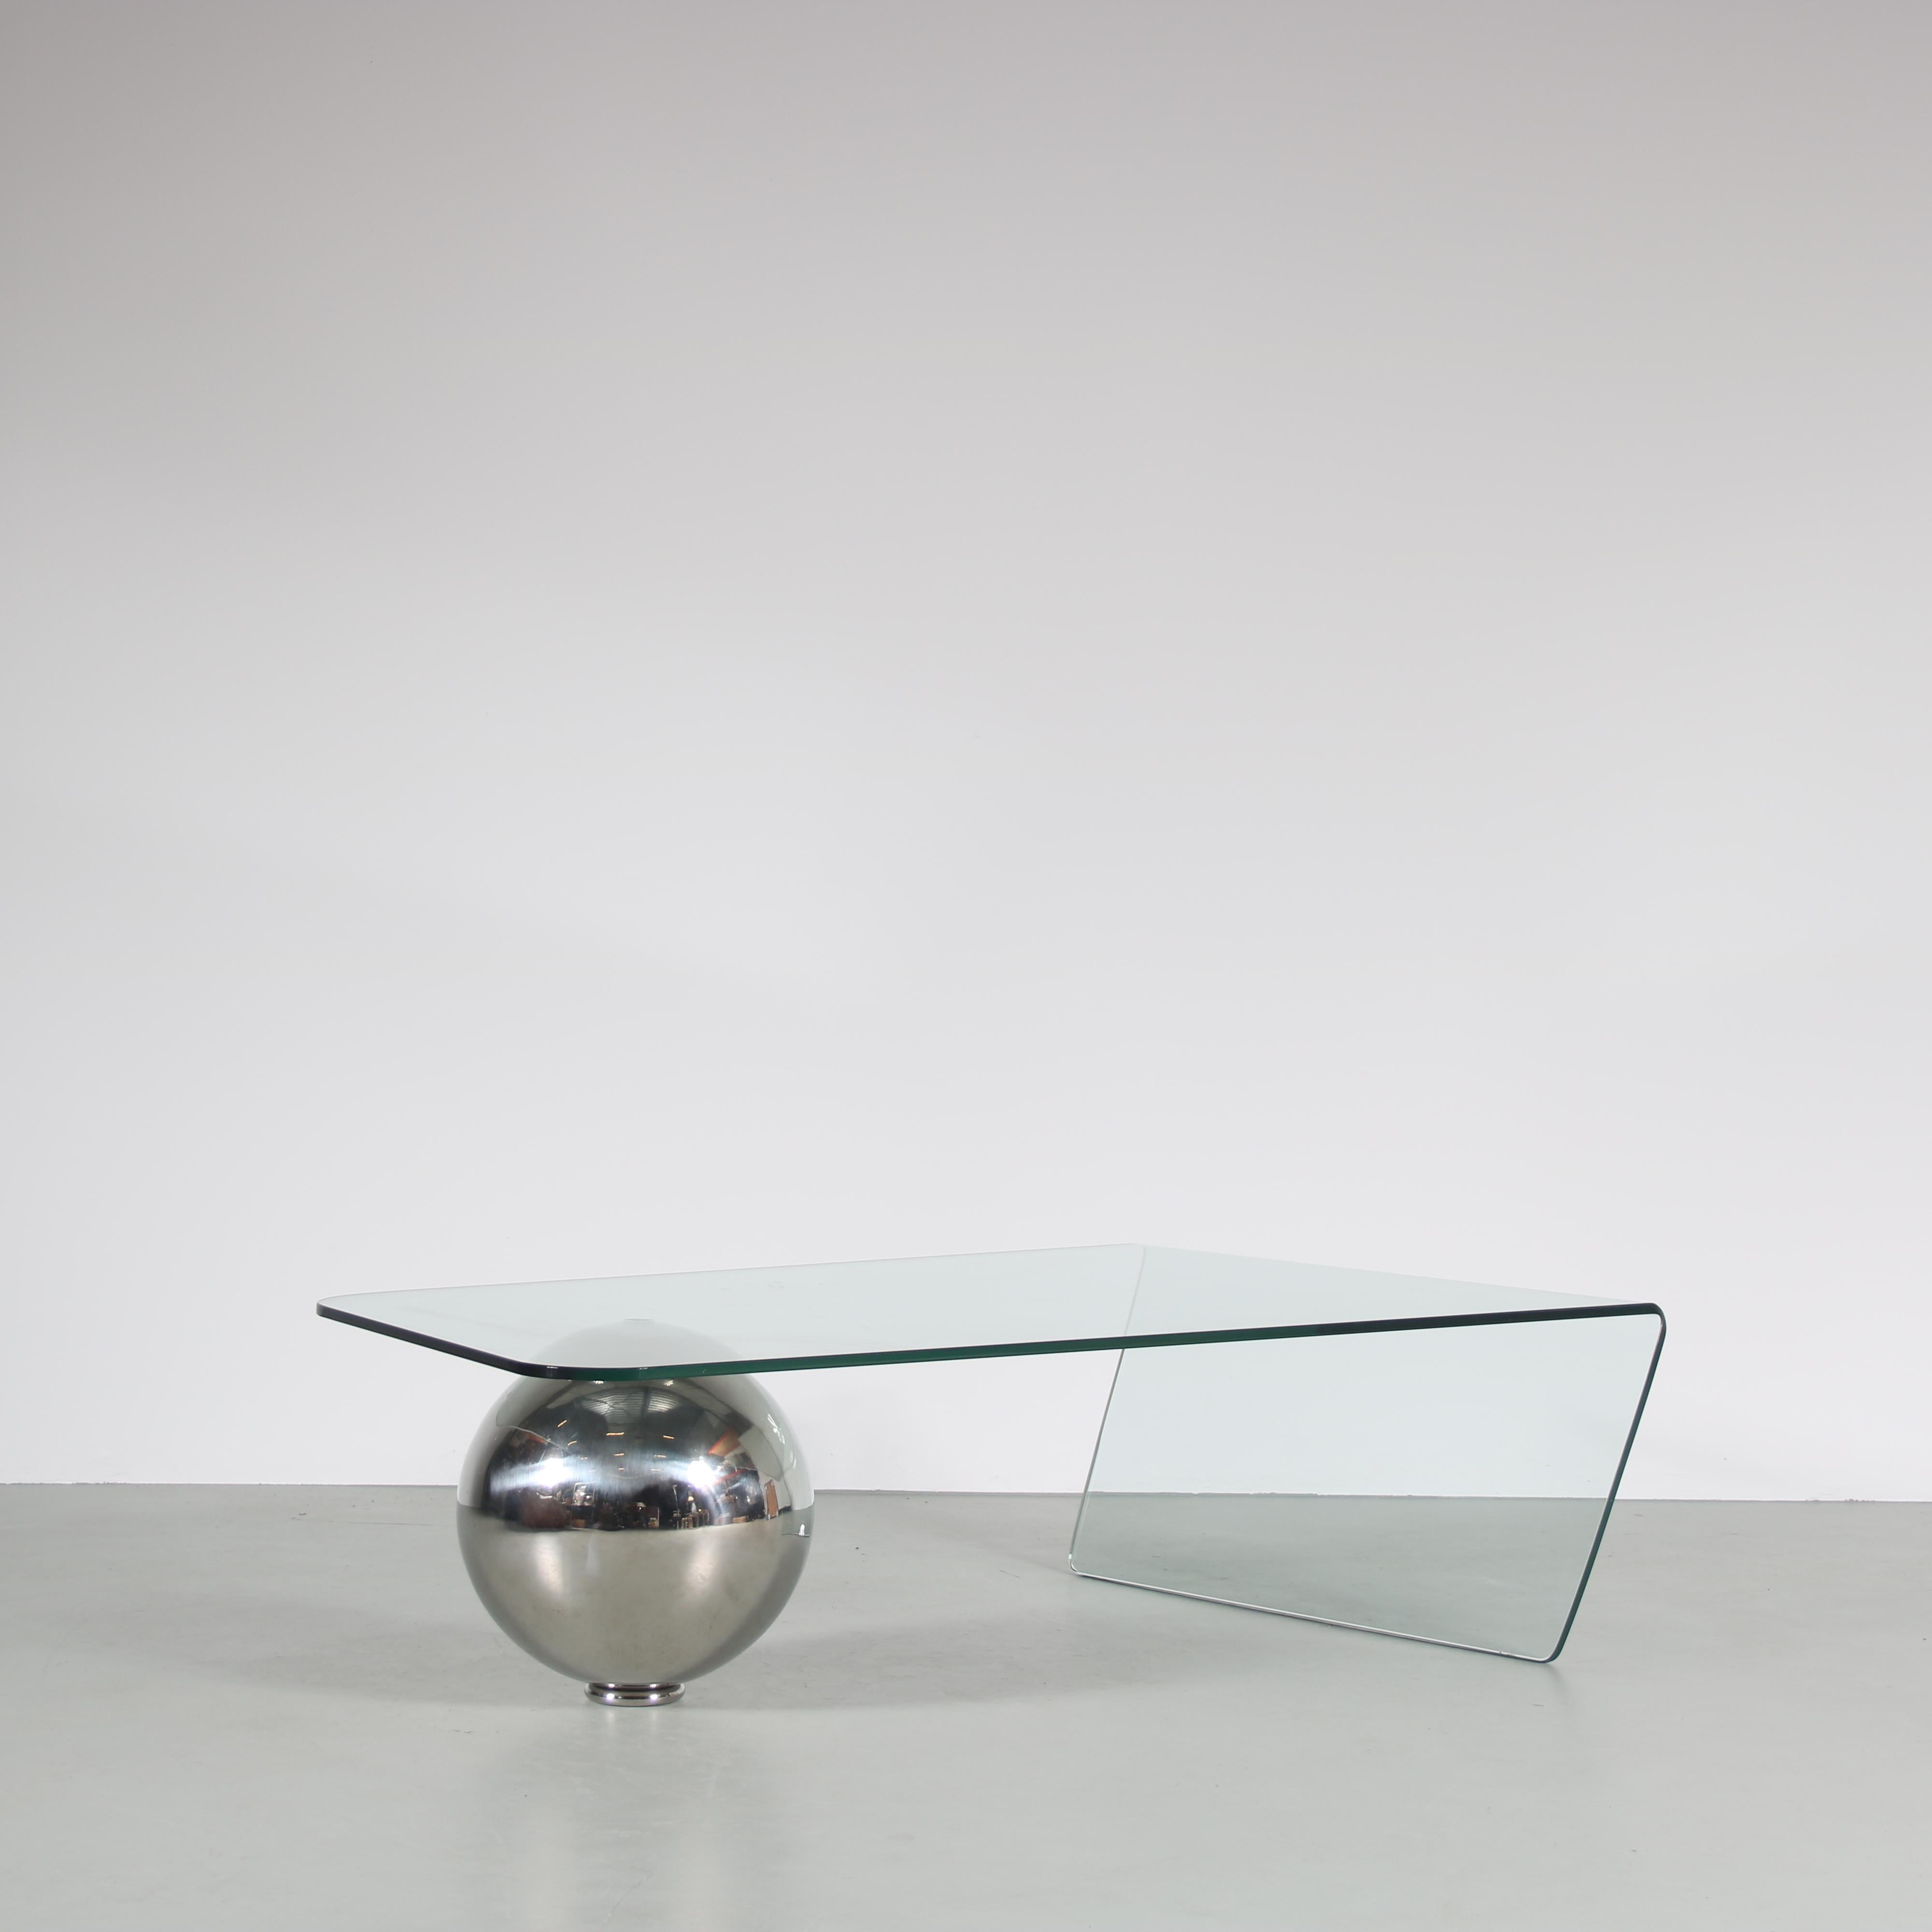 An eye-catching coffee table, model “Globe”, designed by Giorgio Cattelan and manufactured by Cattelan in Italy around 1970.

Made of high quality glass, bent into shape and balanced with a chrome plated metal ball shape at the other end. This